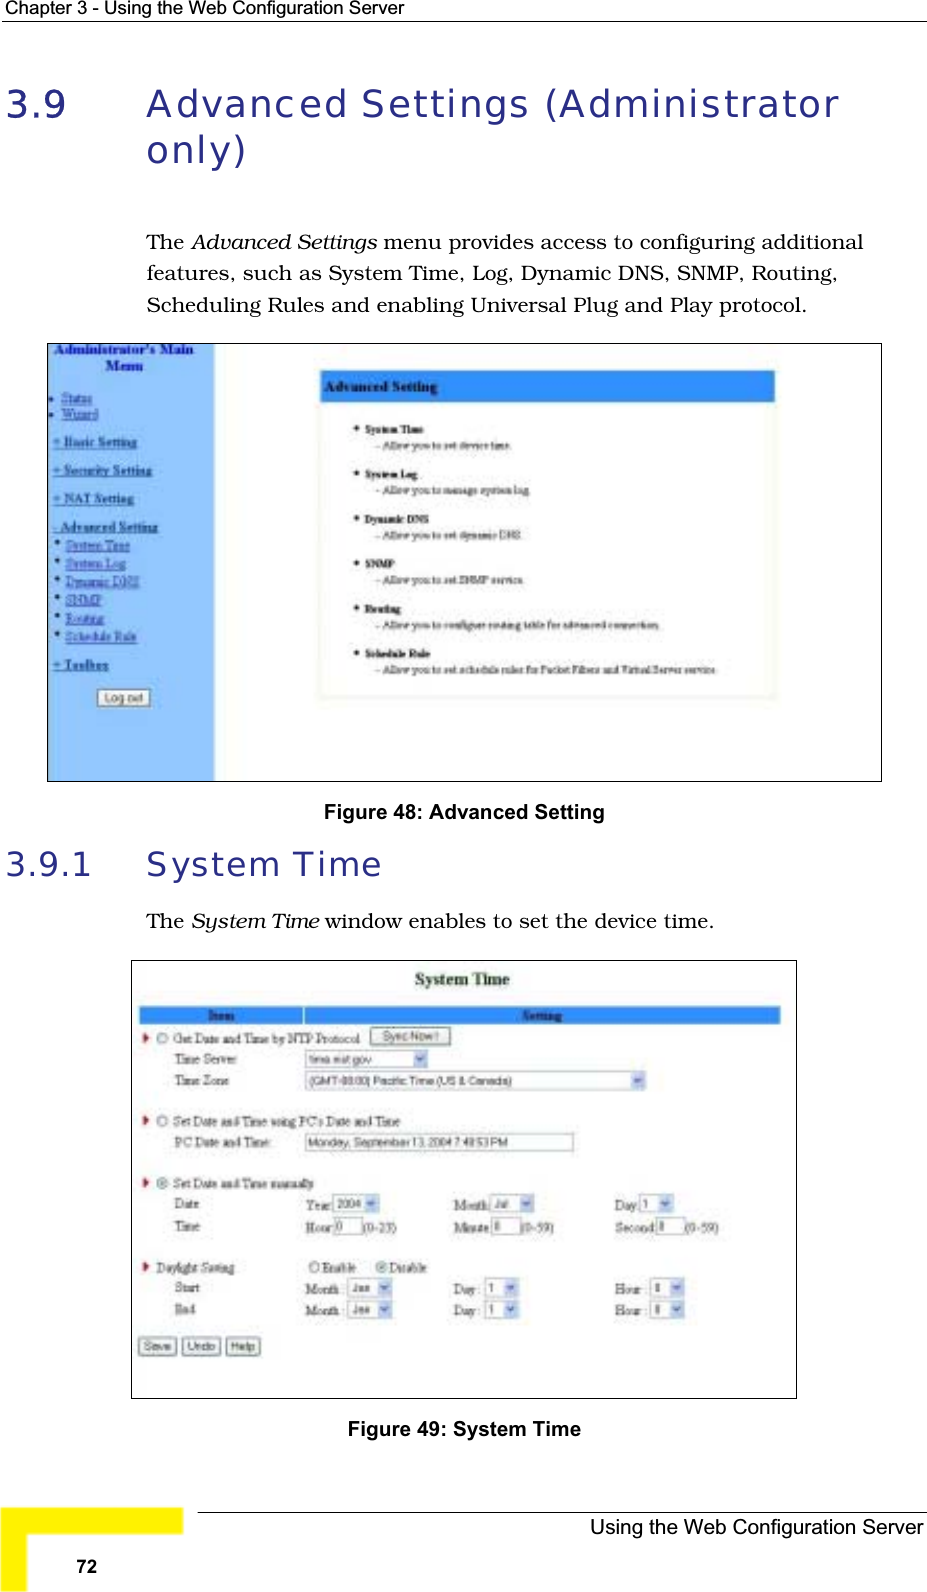 Chapter 3 - Using the Web Configuration Server3.9 Advanced Settings (Administrator only)The Advanced Settings menu provides access to configuring additionalfeatures, such as System Time, Log, Dynamic DNS, SNMP, Routing,Scheduling Rules and enabling Universal Plug and Play protocol.Figure 48: Advanced Setting 3.9.1 System TimeThe System Time window enables to set the device time.Figure 49: System Time Using the Web Configuration Server72